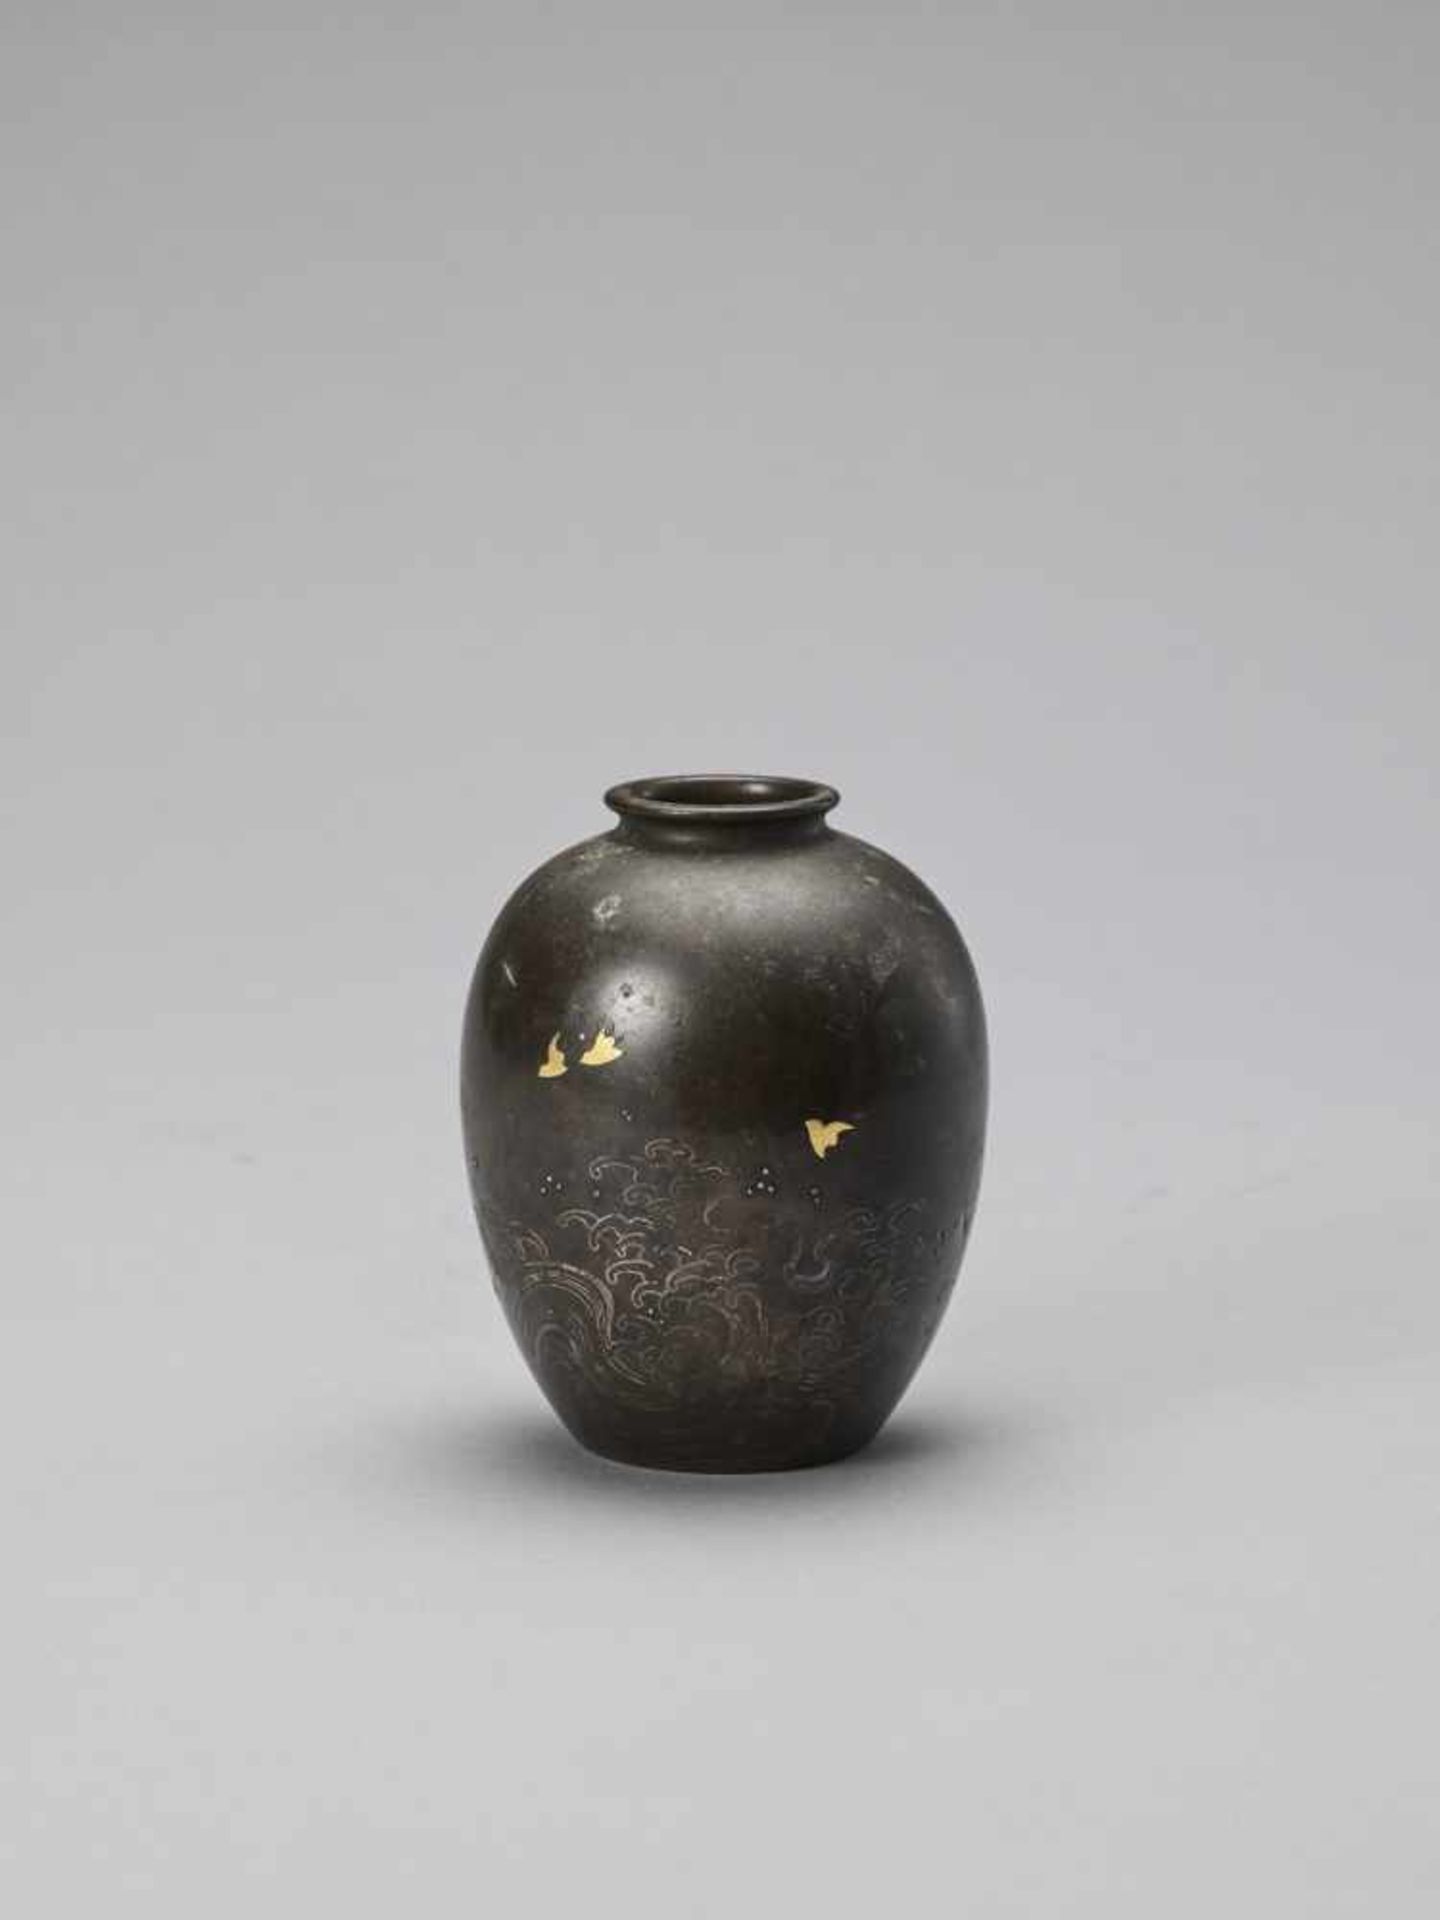 A SMALL SILVER INLAID BRONZE VASE